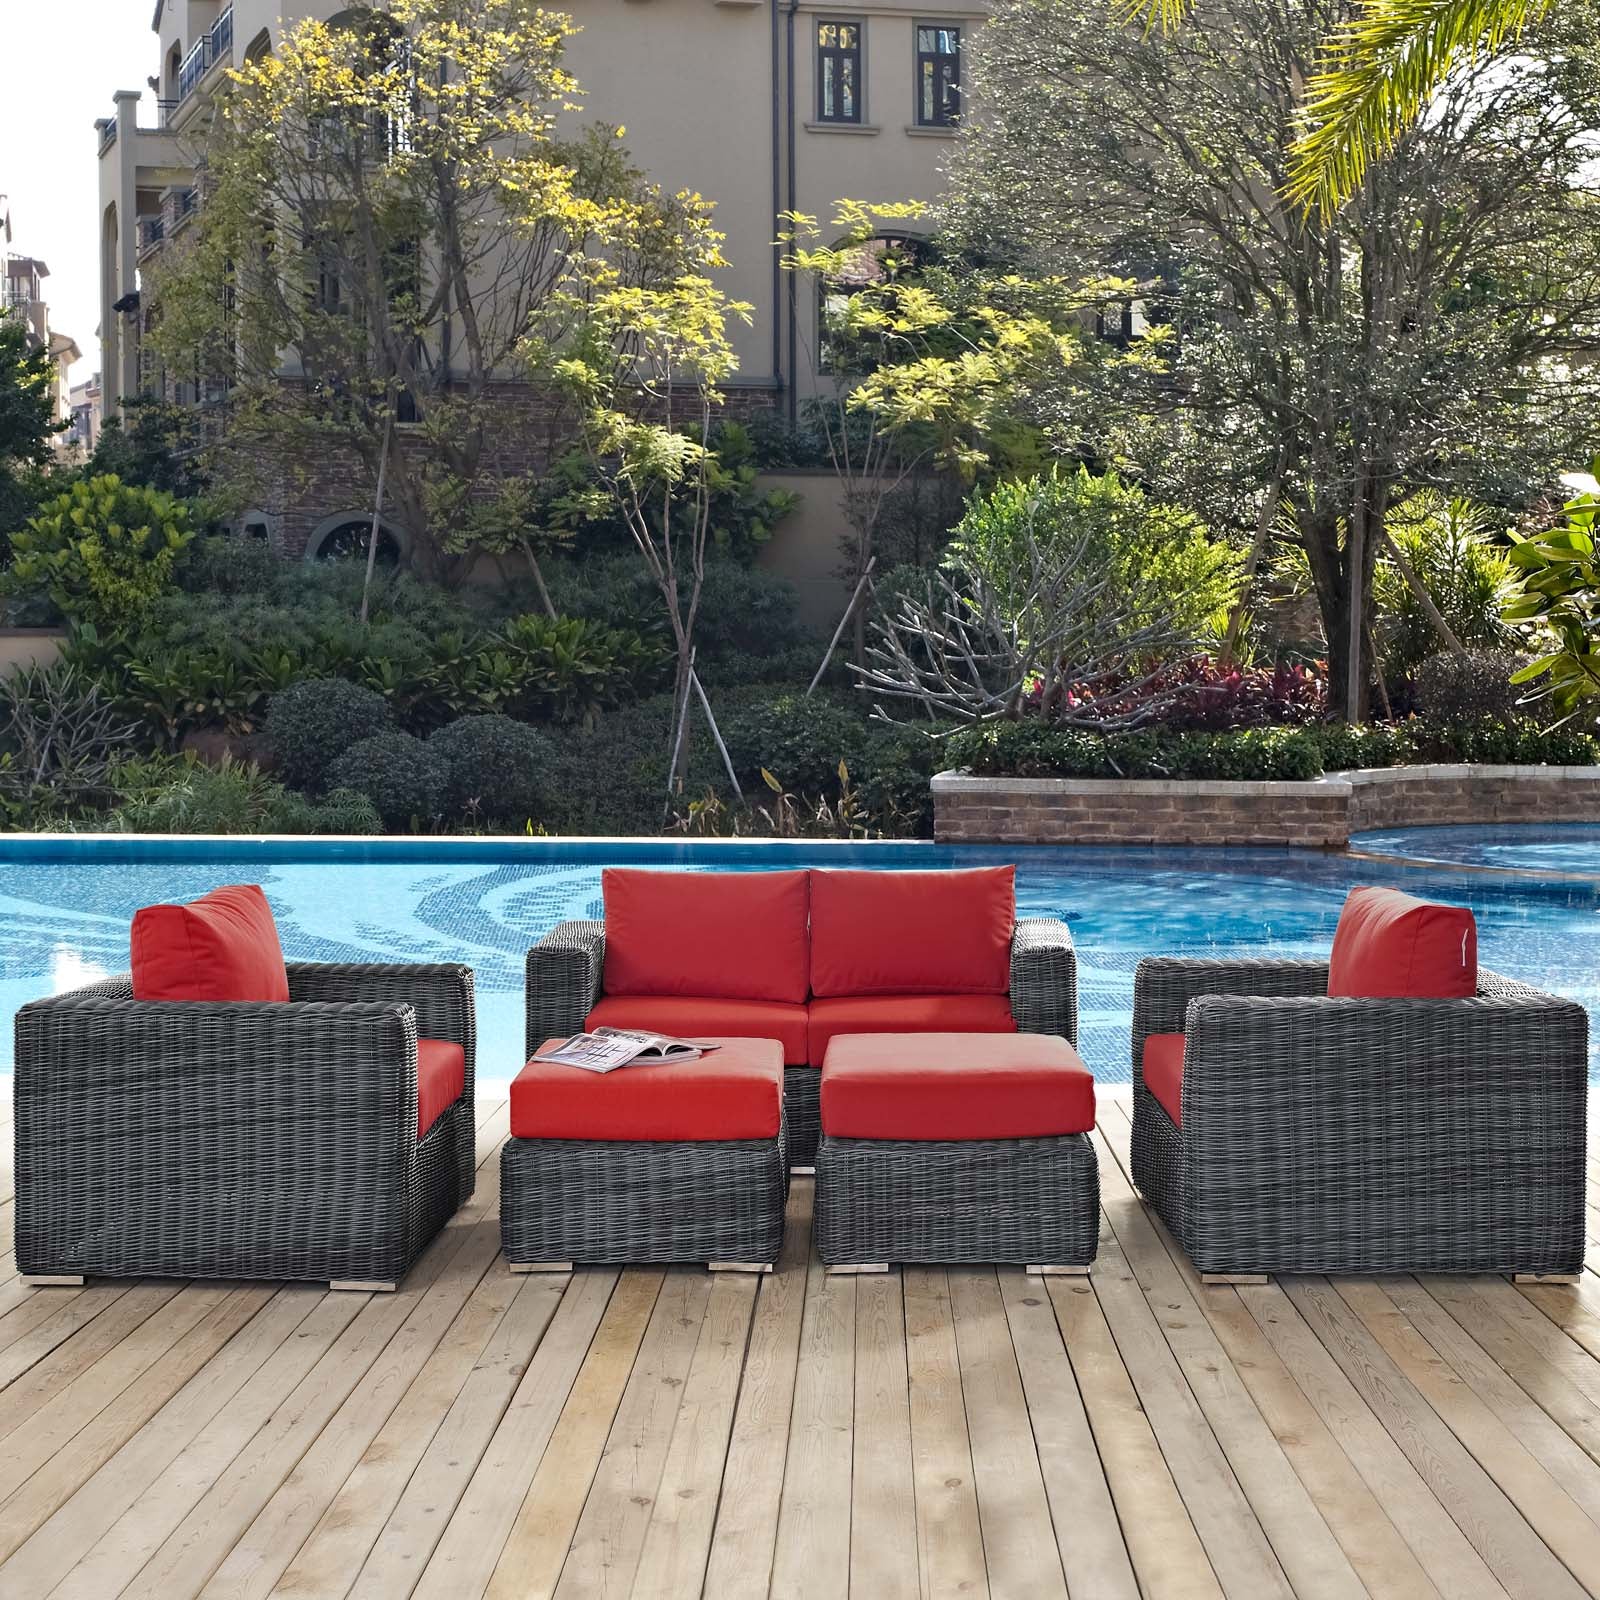 Modway Outdoor Conversation Sets - Summon 5 Piece Outdoor Patio Sectional Set Canvas Red